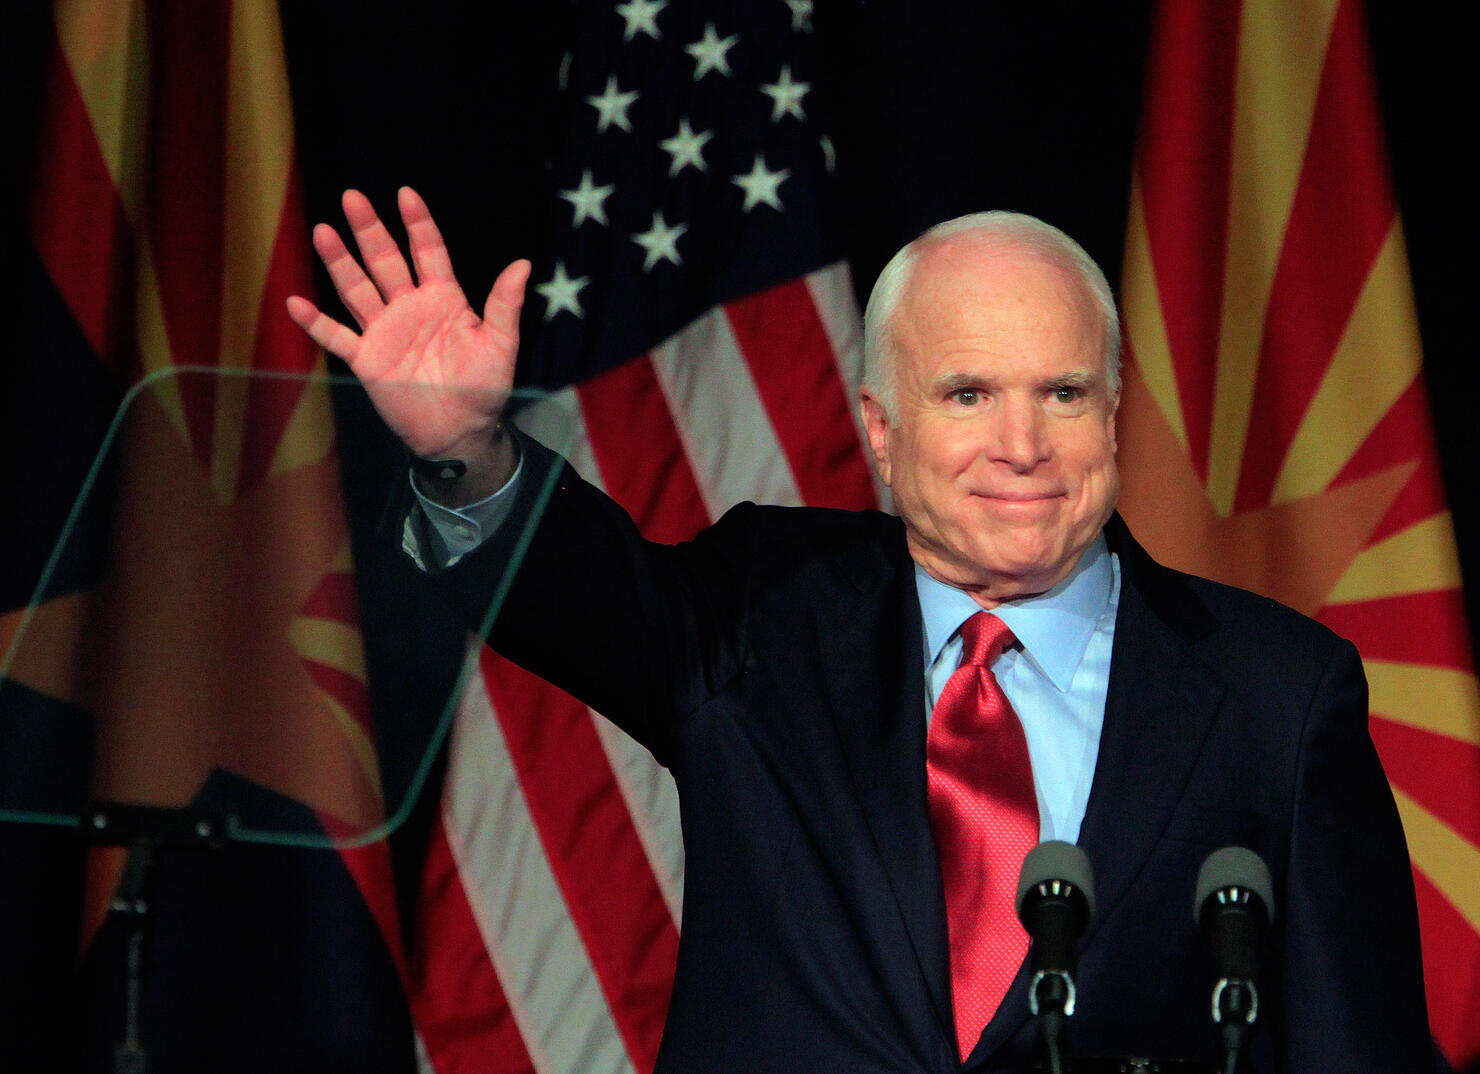 John McCain is discontinuing treatment for brain cancer family says